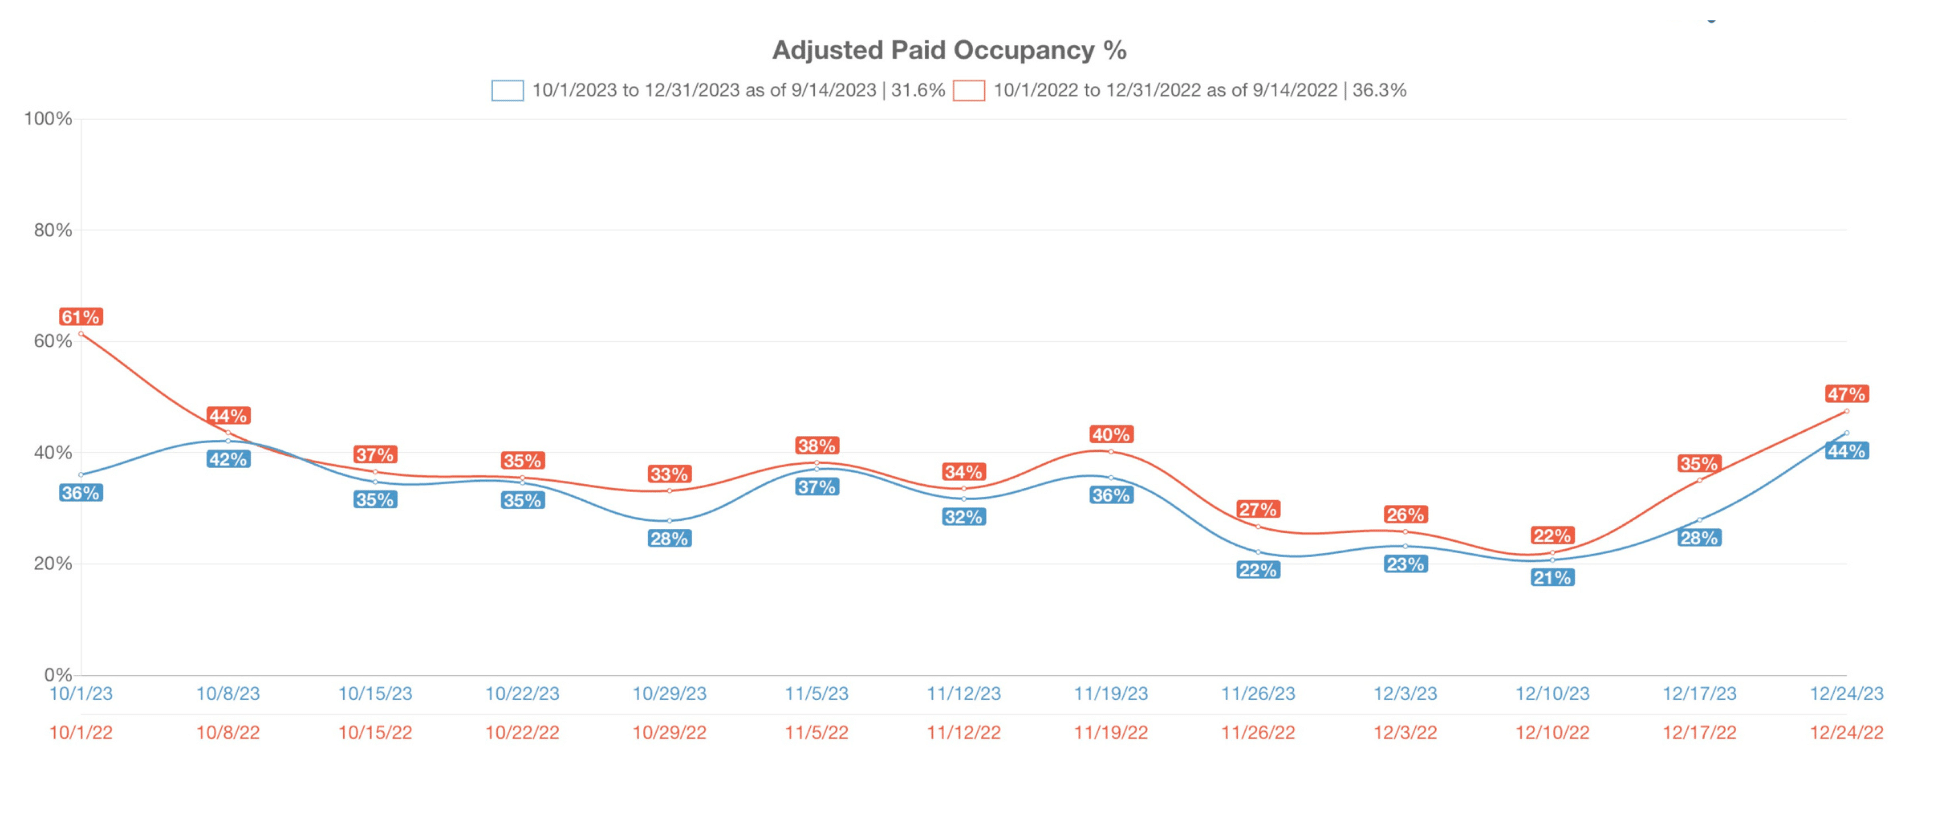 graph depicting the adjusted paid occupancy trends for the years of 2022 and 2023 in the vacation rental industry